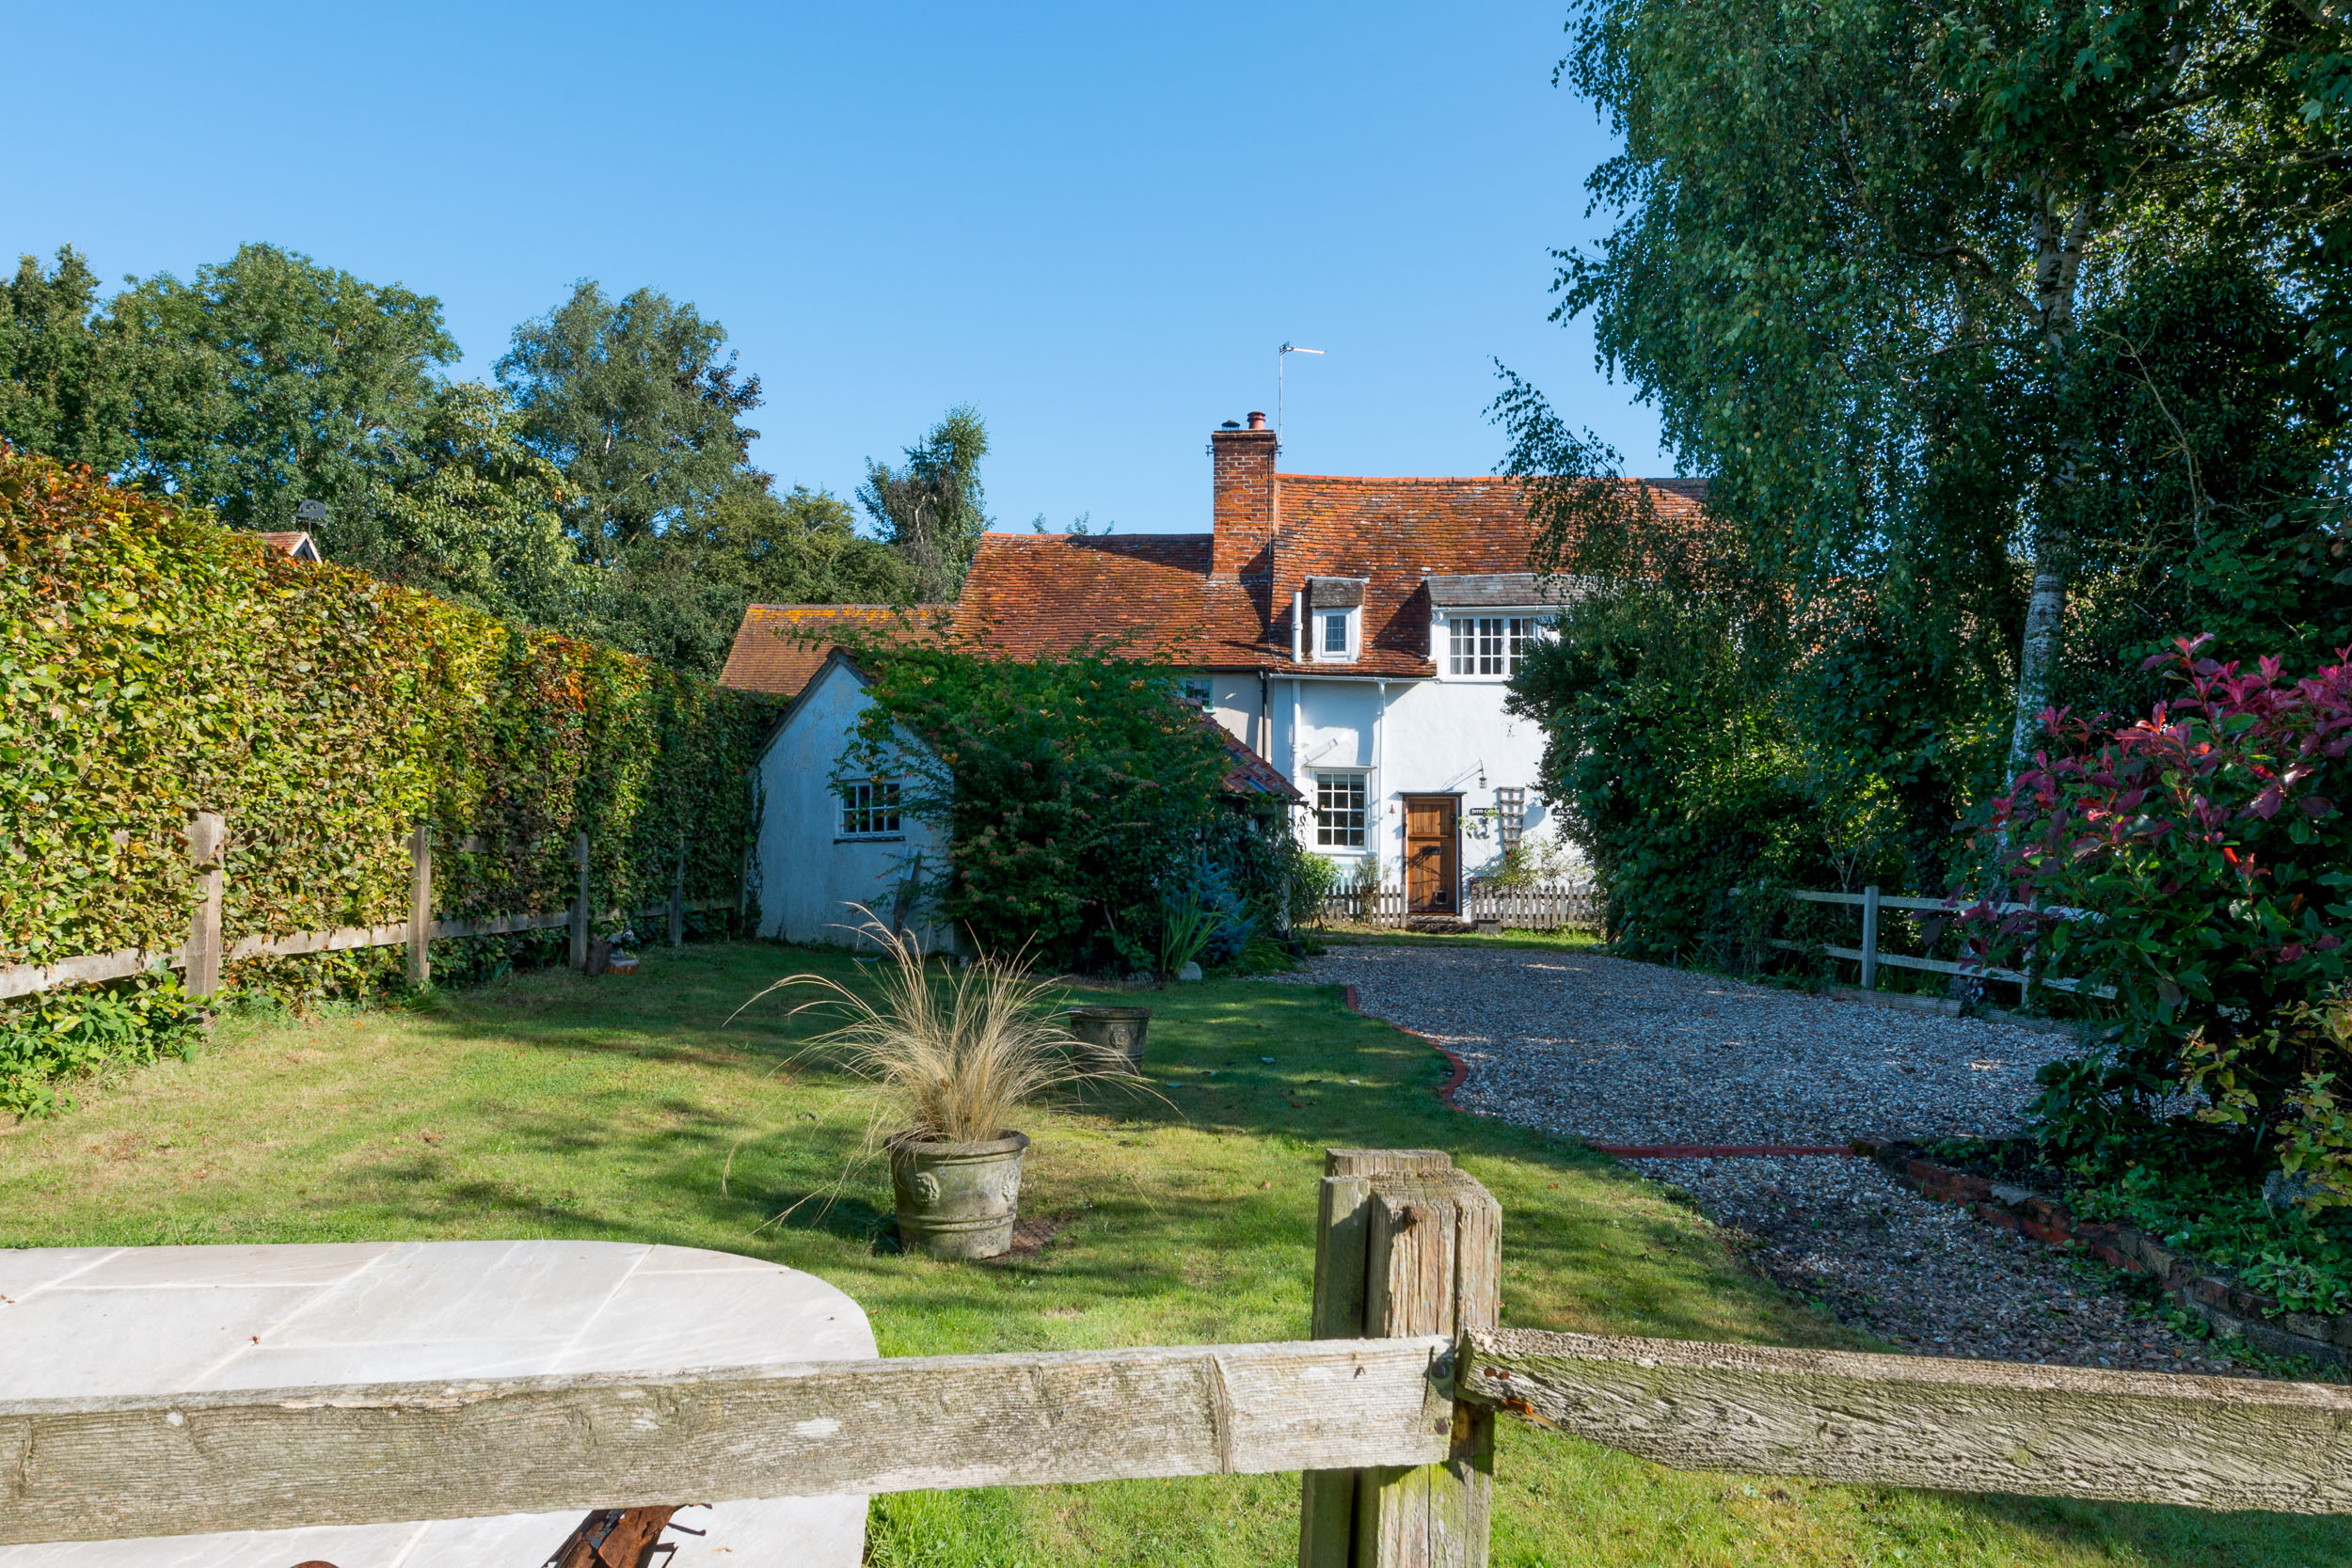 Putts Cottage, happily lost in beautiful Suffolk countryside